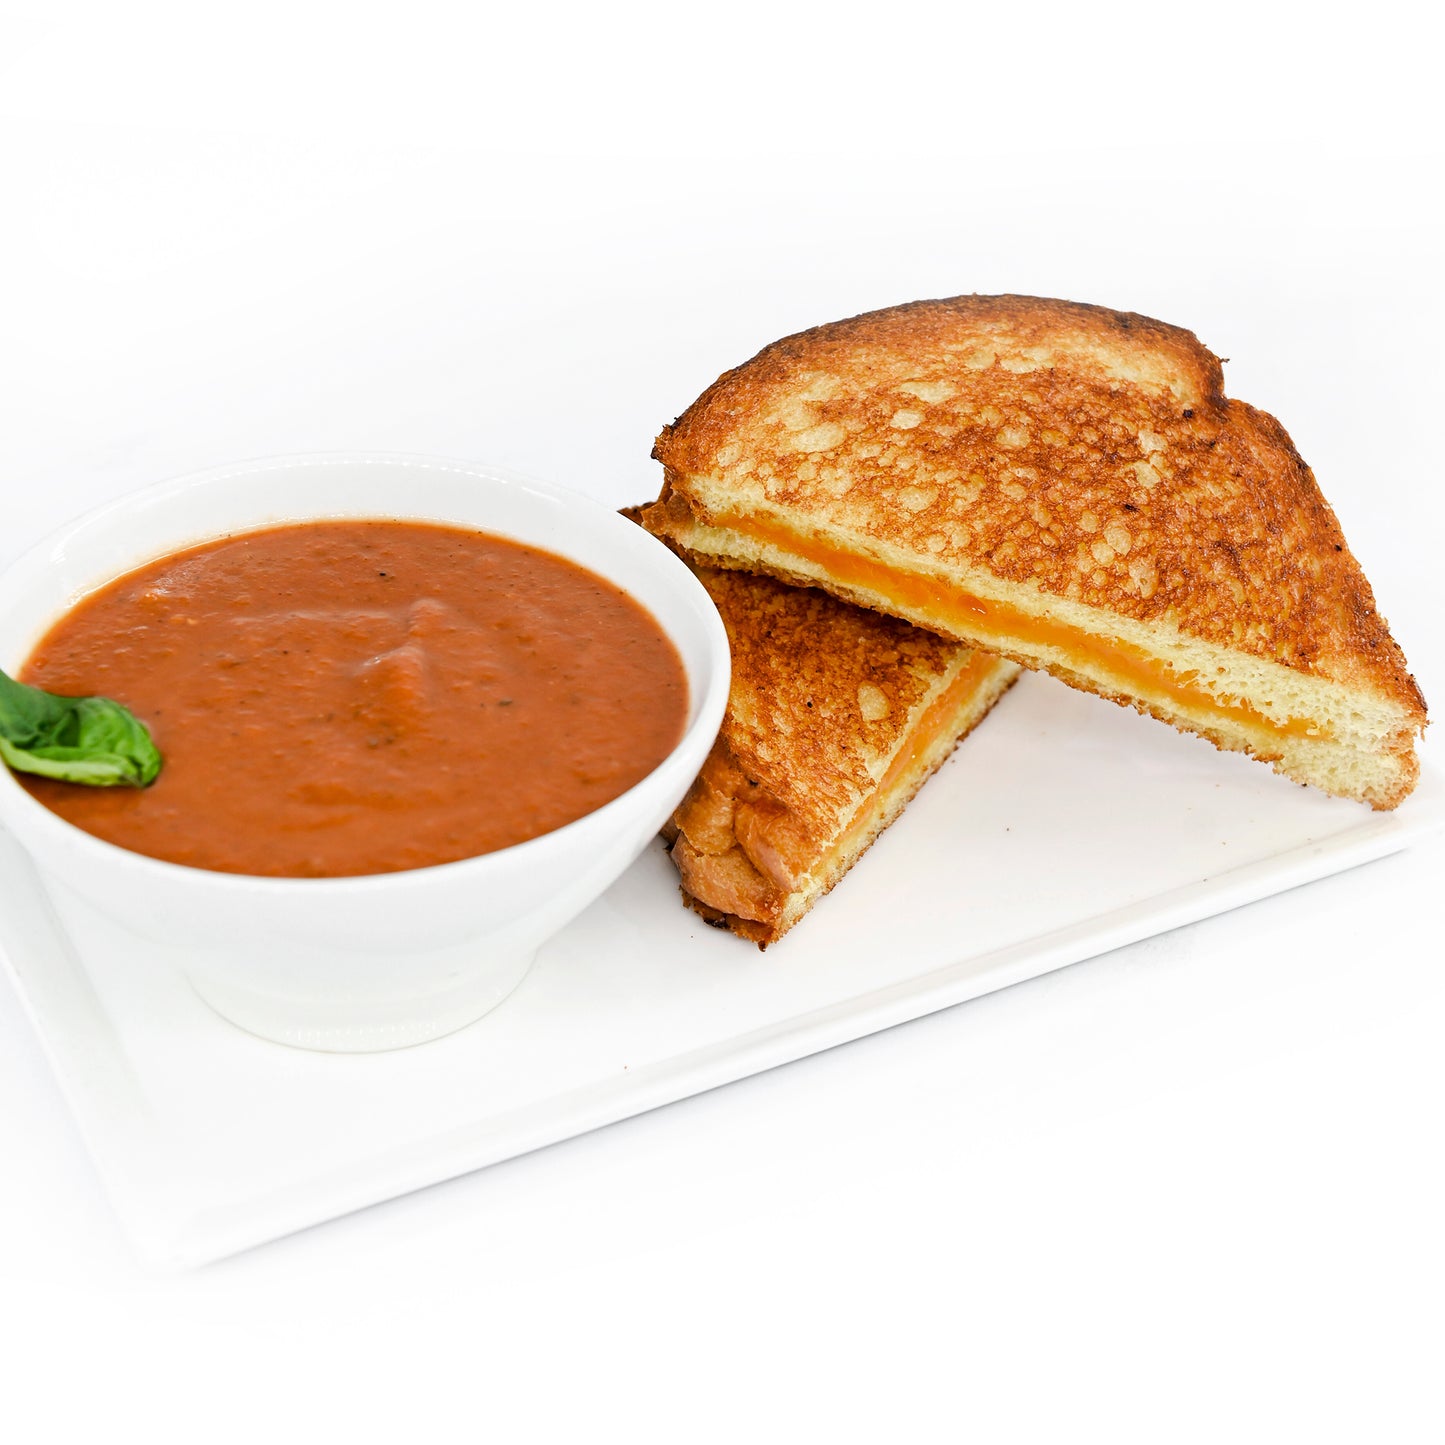 KID'S CHALLAH GRILLED CHEESE & TOMATO SOUP